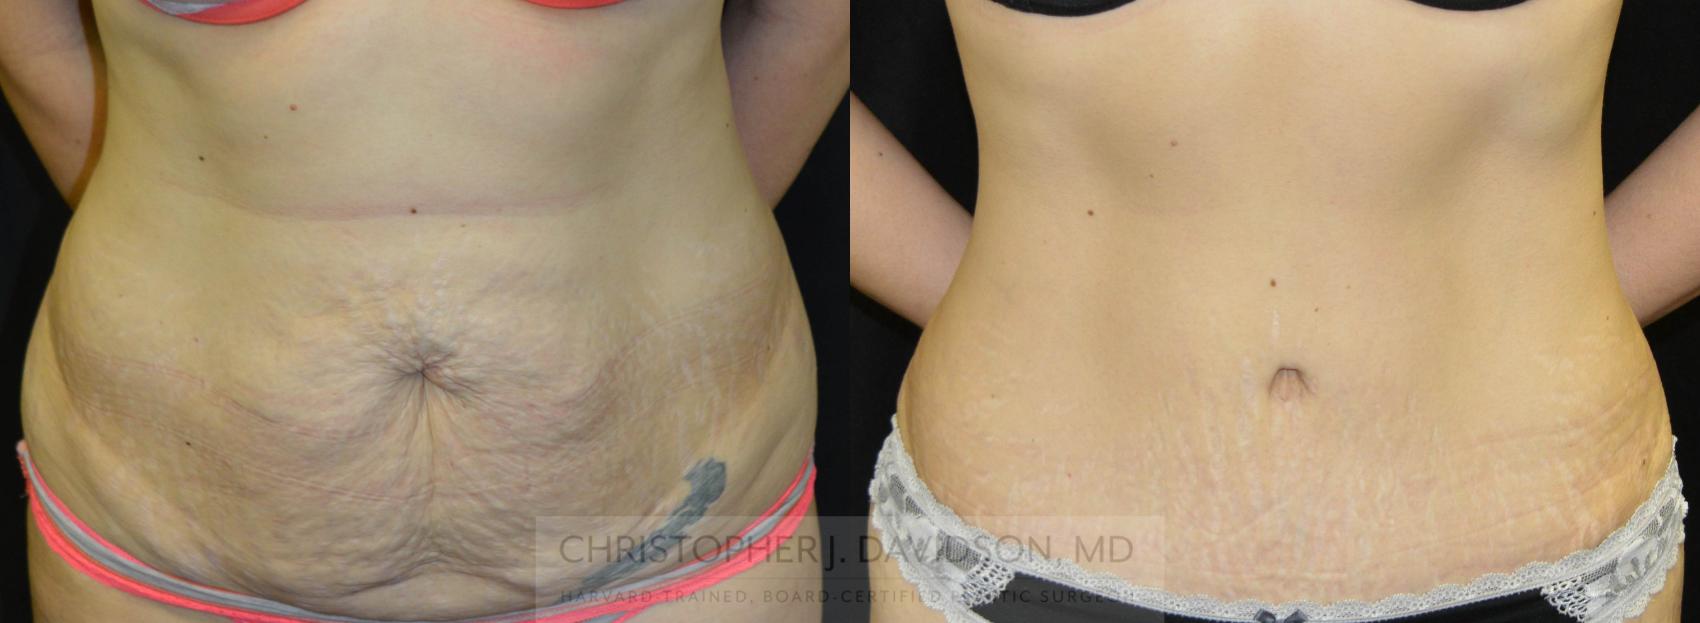 Tummy Tuck (Abdominoplasty) Case 26 Before & After View #1 | Wellesley & Boston, MA | Christopher J. Davidson, MD